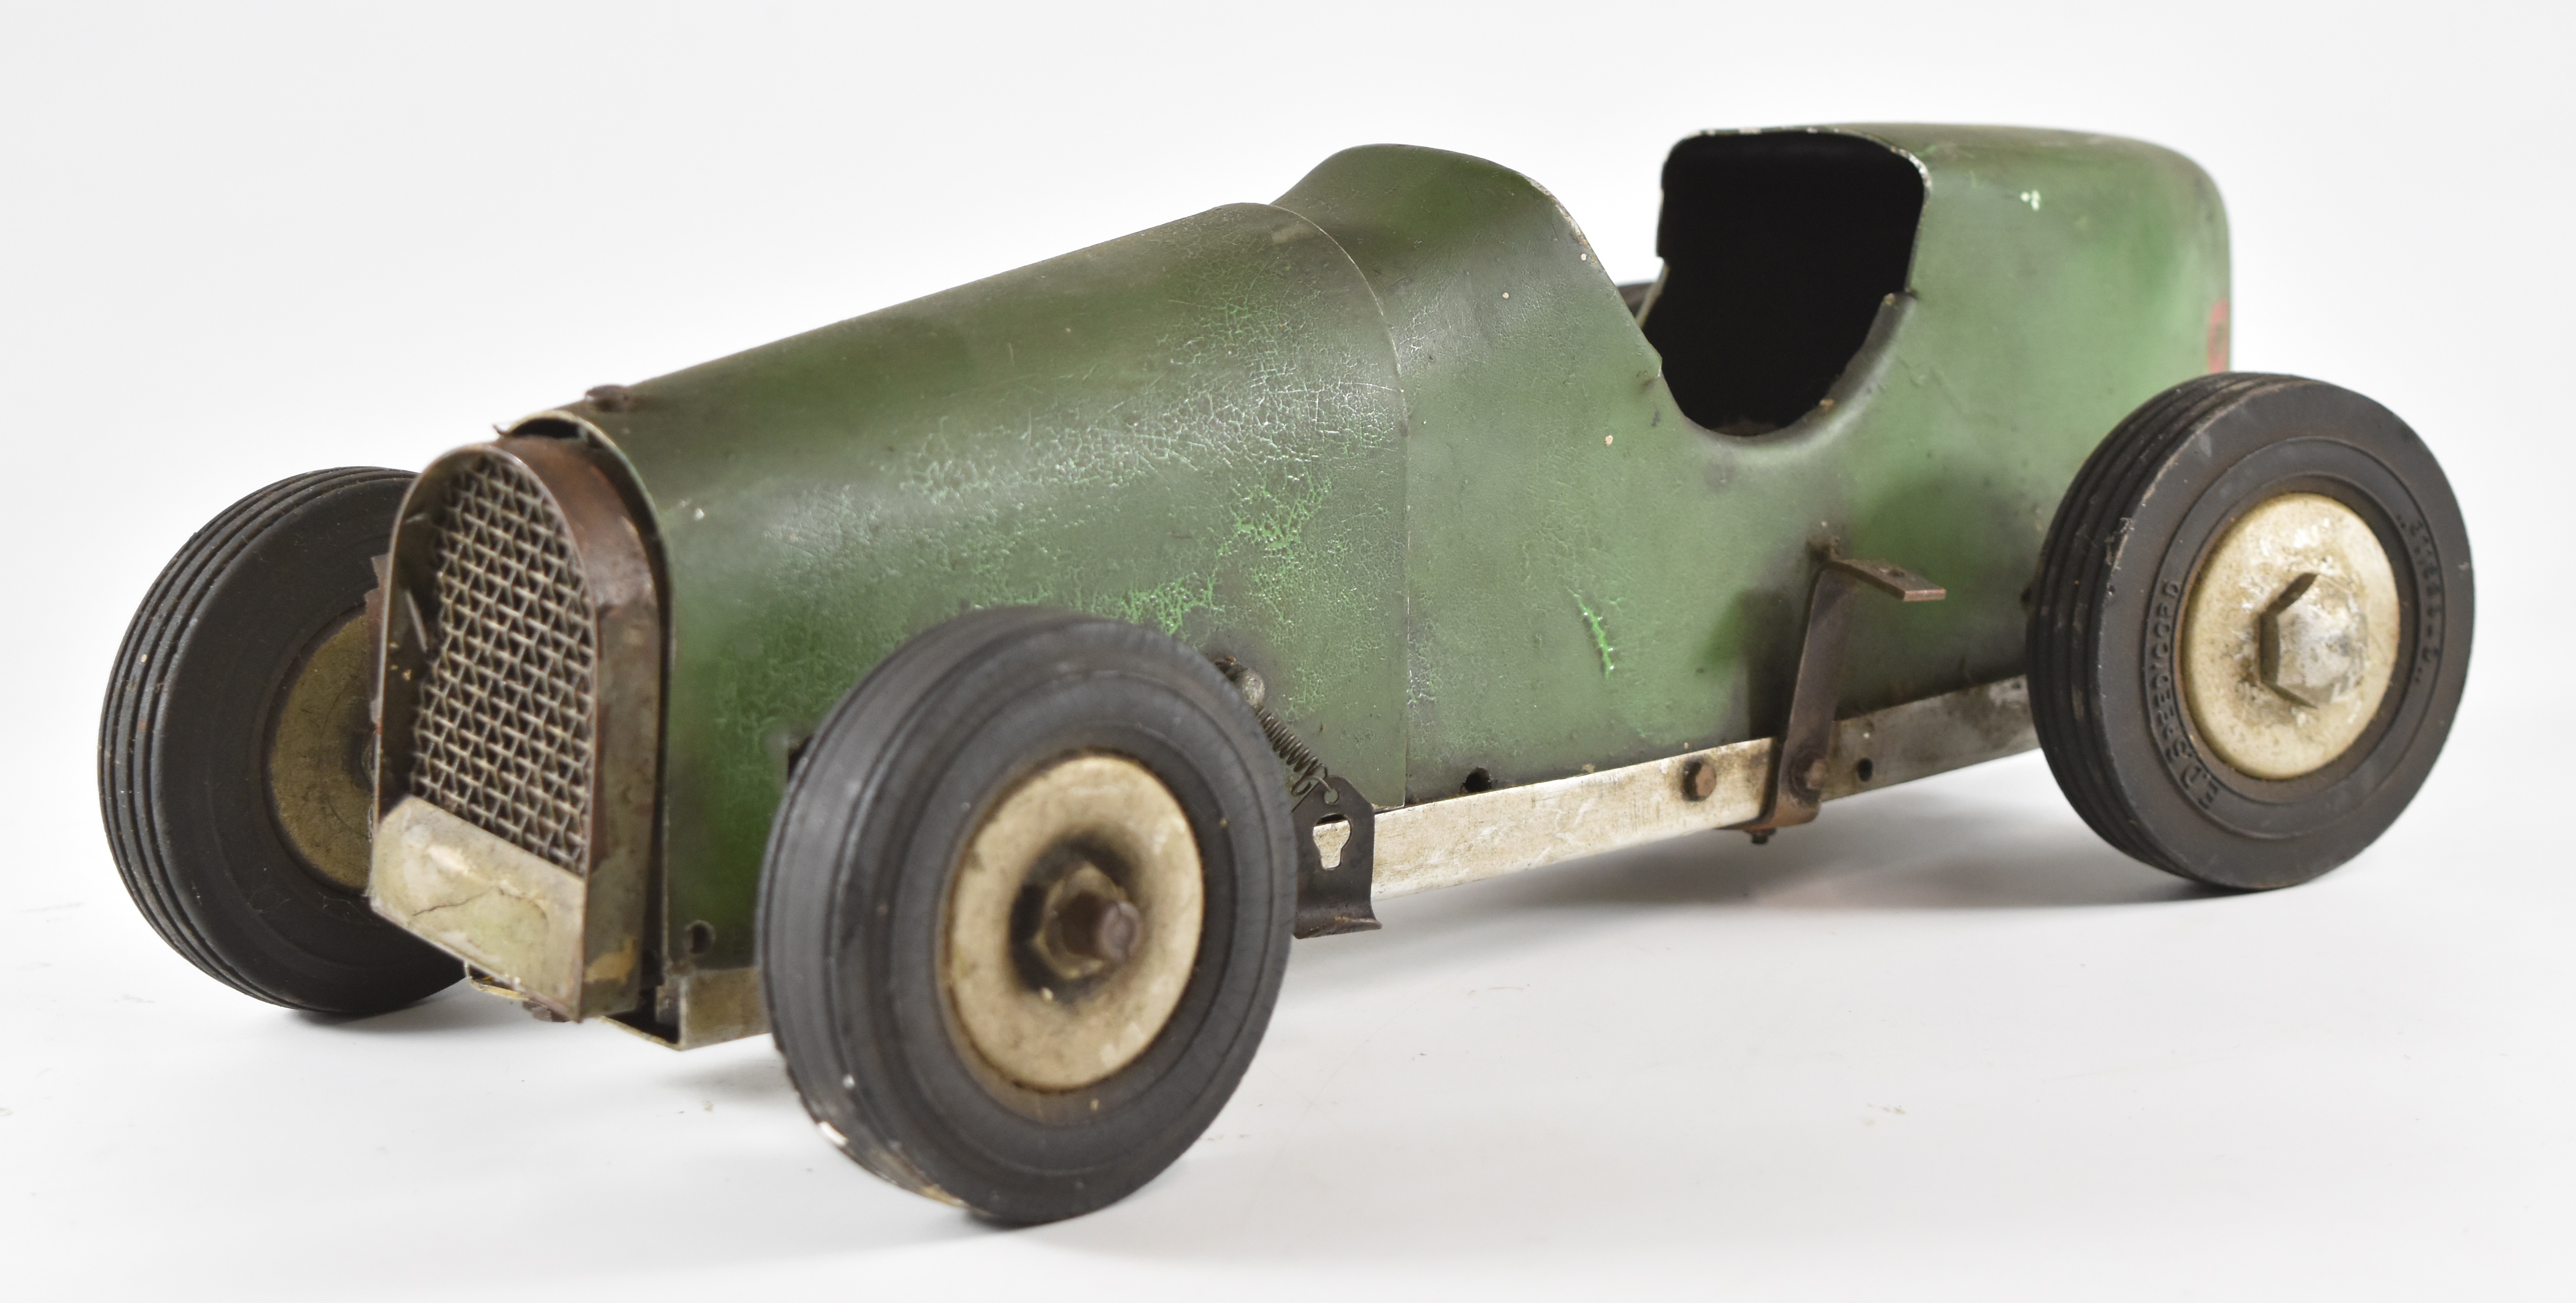 Vintage diesel engine powered model pylon racing car in the style of a 1930s single seat racing car,